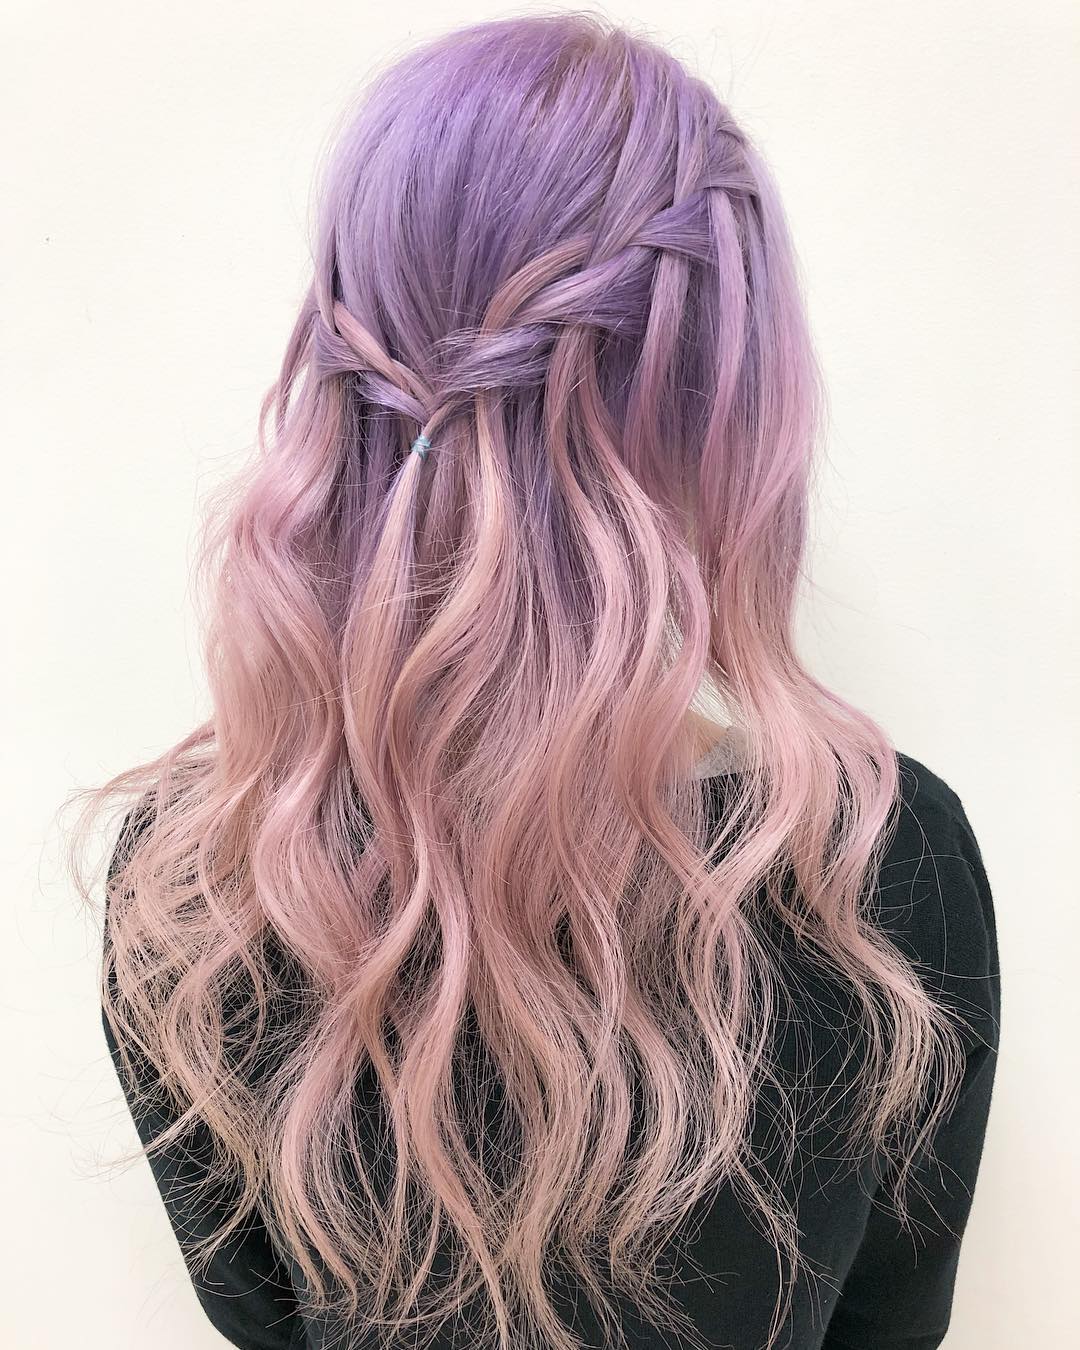 Lilac Pink Color in a Braided Half-Up Style